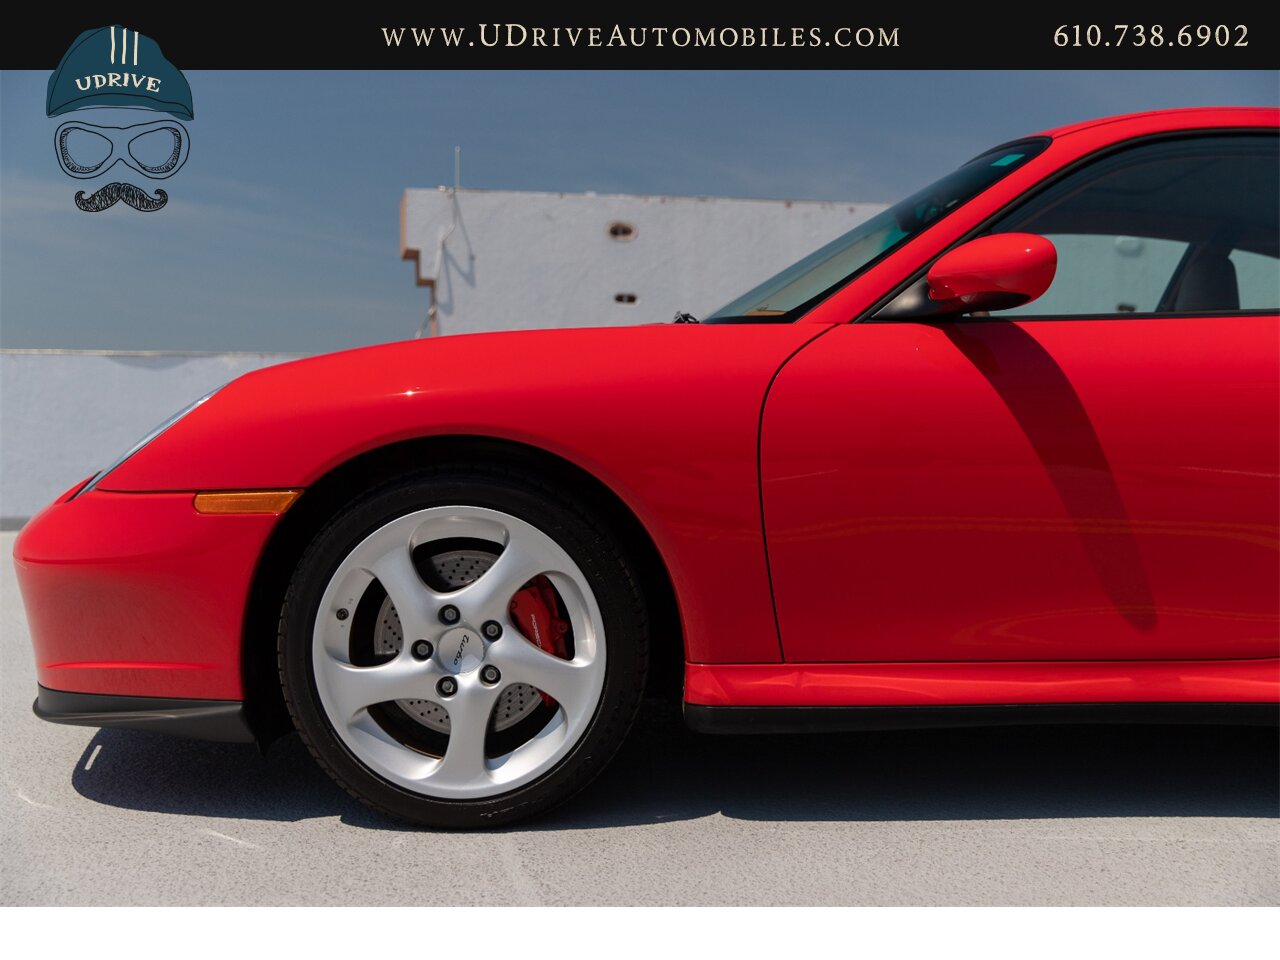 2003 Porsche 911 Turbo 996 Turbo X50 Power Kit 6 Speed Manual  Rare Color Guards Red over Brown Natural Leather - Photo 10 - West Chester, PA 19382